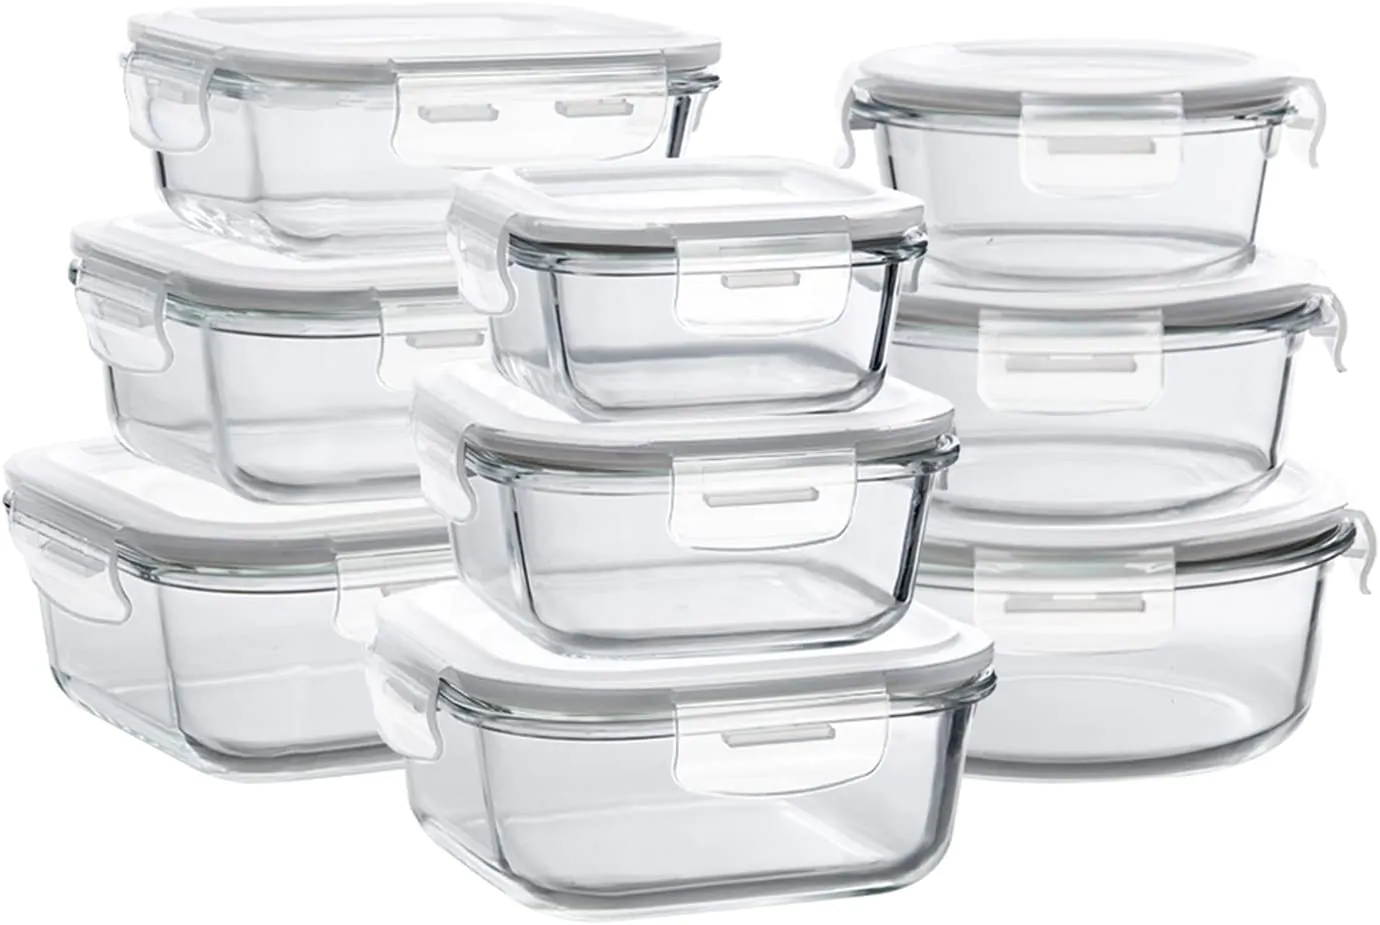 Set of 9 glass food storage containers with lids leak proof